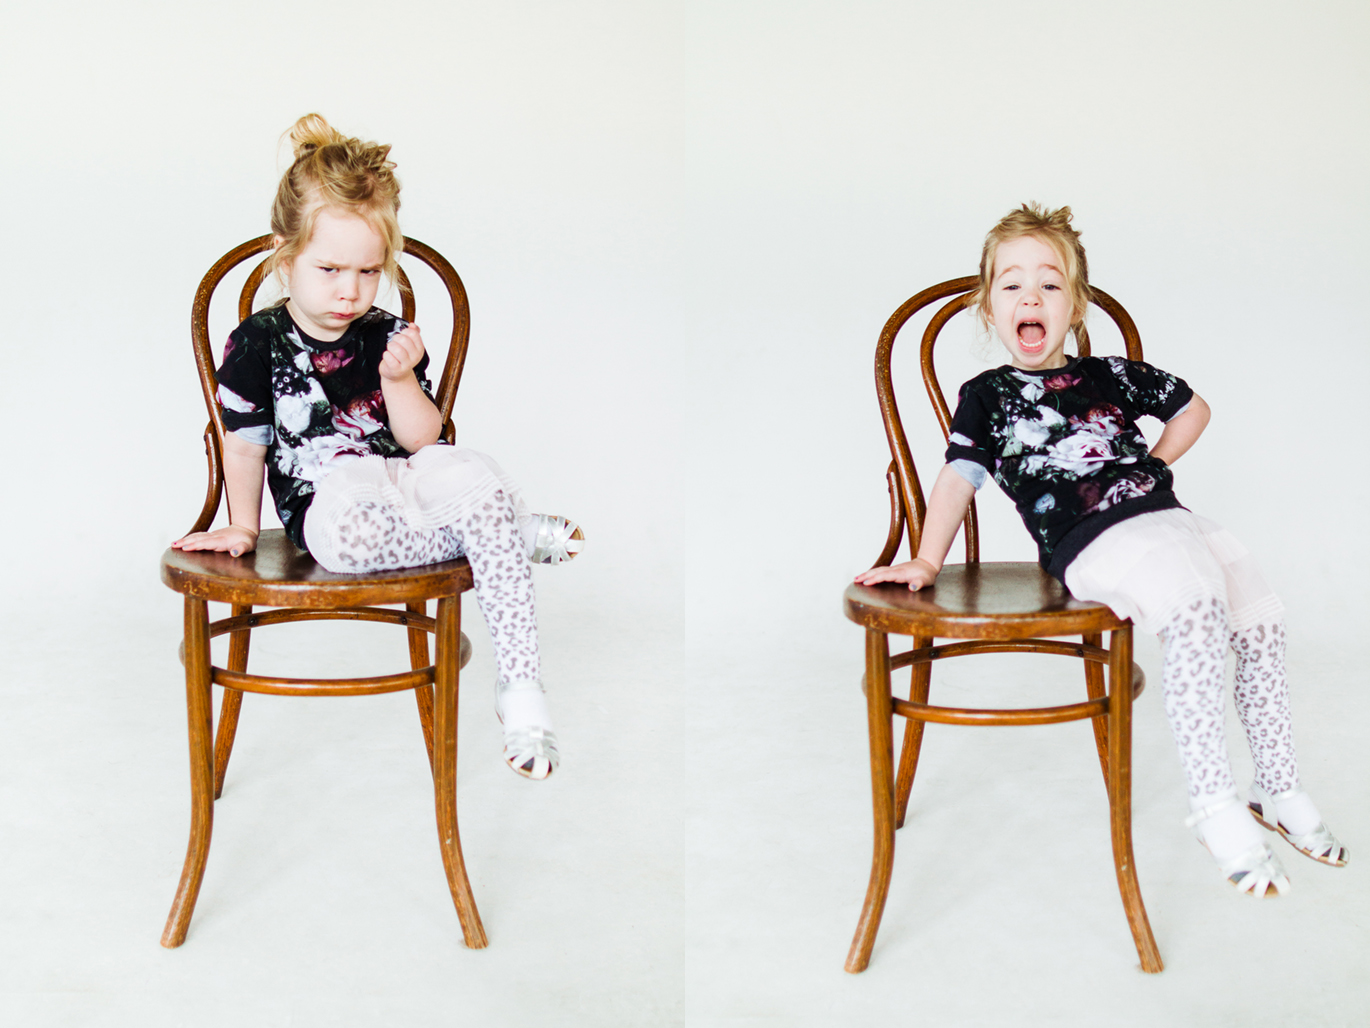 Hilarious photos of kids in a photo studio